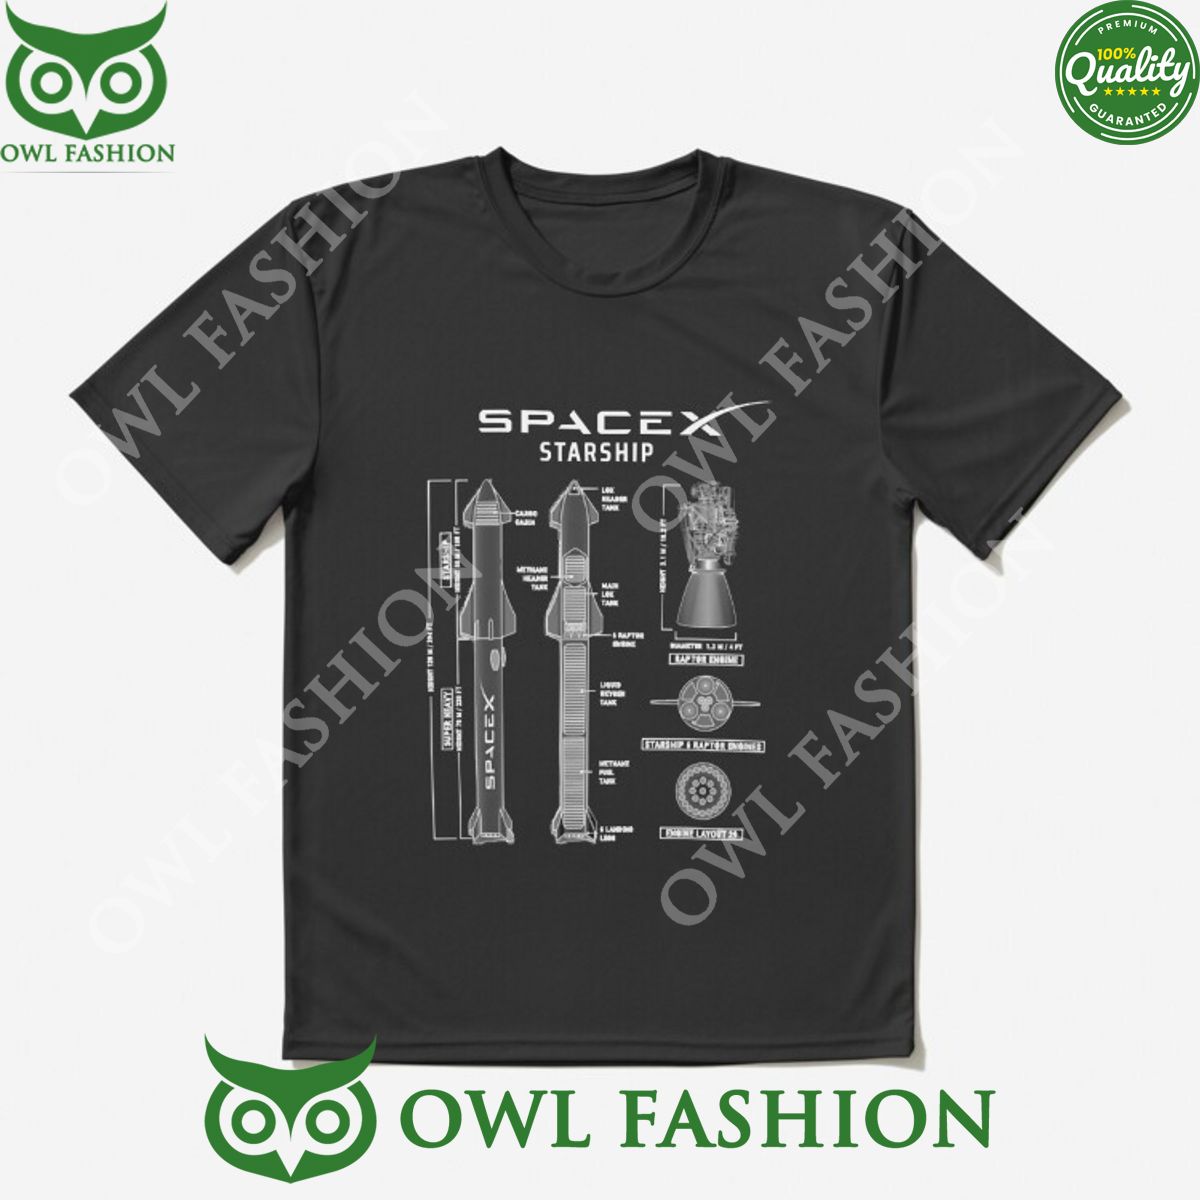 Spacex Starship Blueprint Elon Musk 2D T Shirt Royal Pic of yours